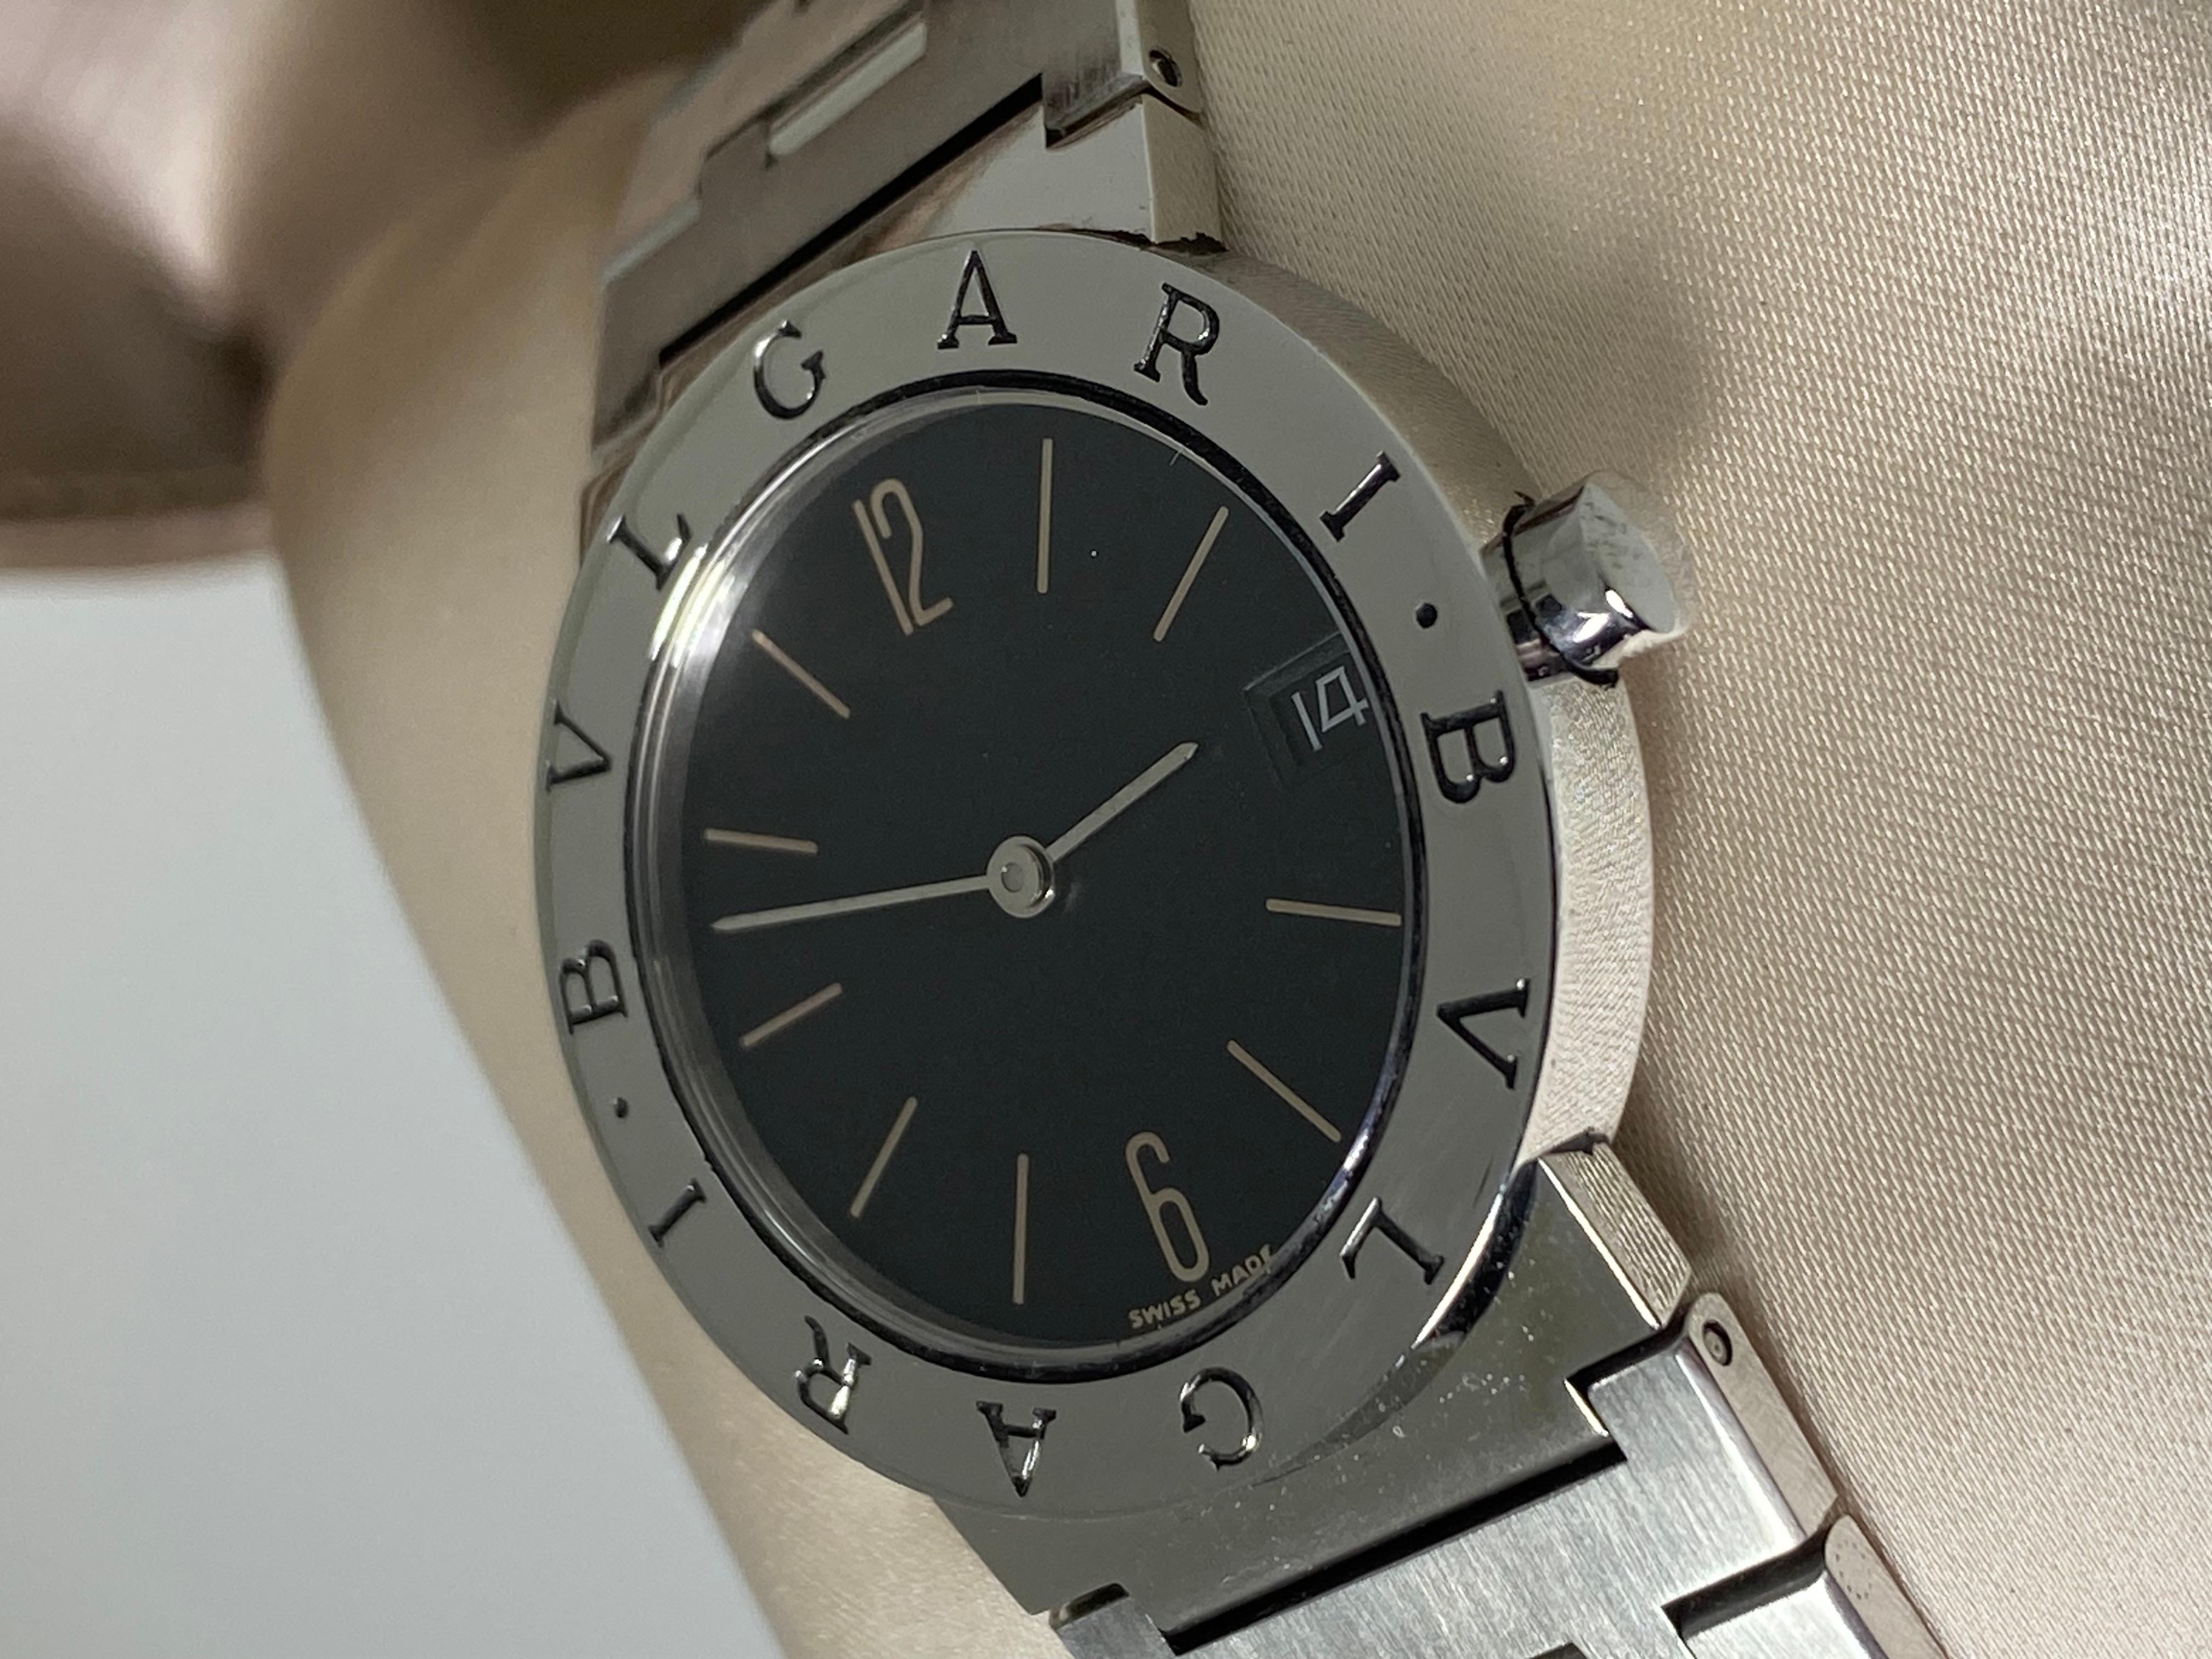 This sophisticated BVLGARI BVLGARI ref. BB30SSD wristwatch 
is one of the most sought after Bulgari models, 
it's in excellent condition & 
comes in original Bulgari gold-coloured case 

~~~

Perfectly proportioned 30mm Case
features an iconic